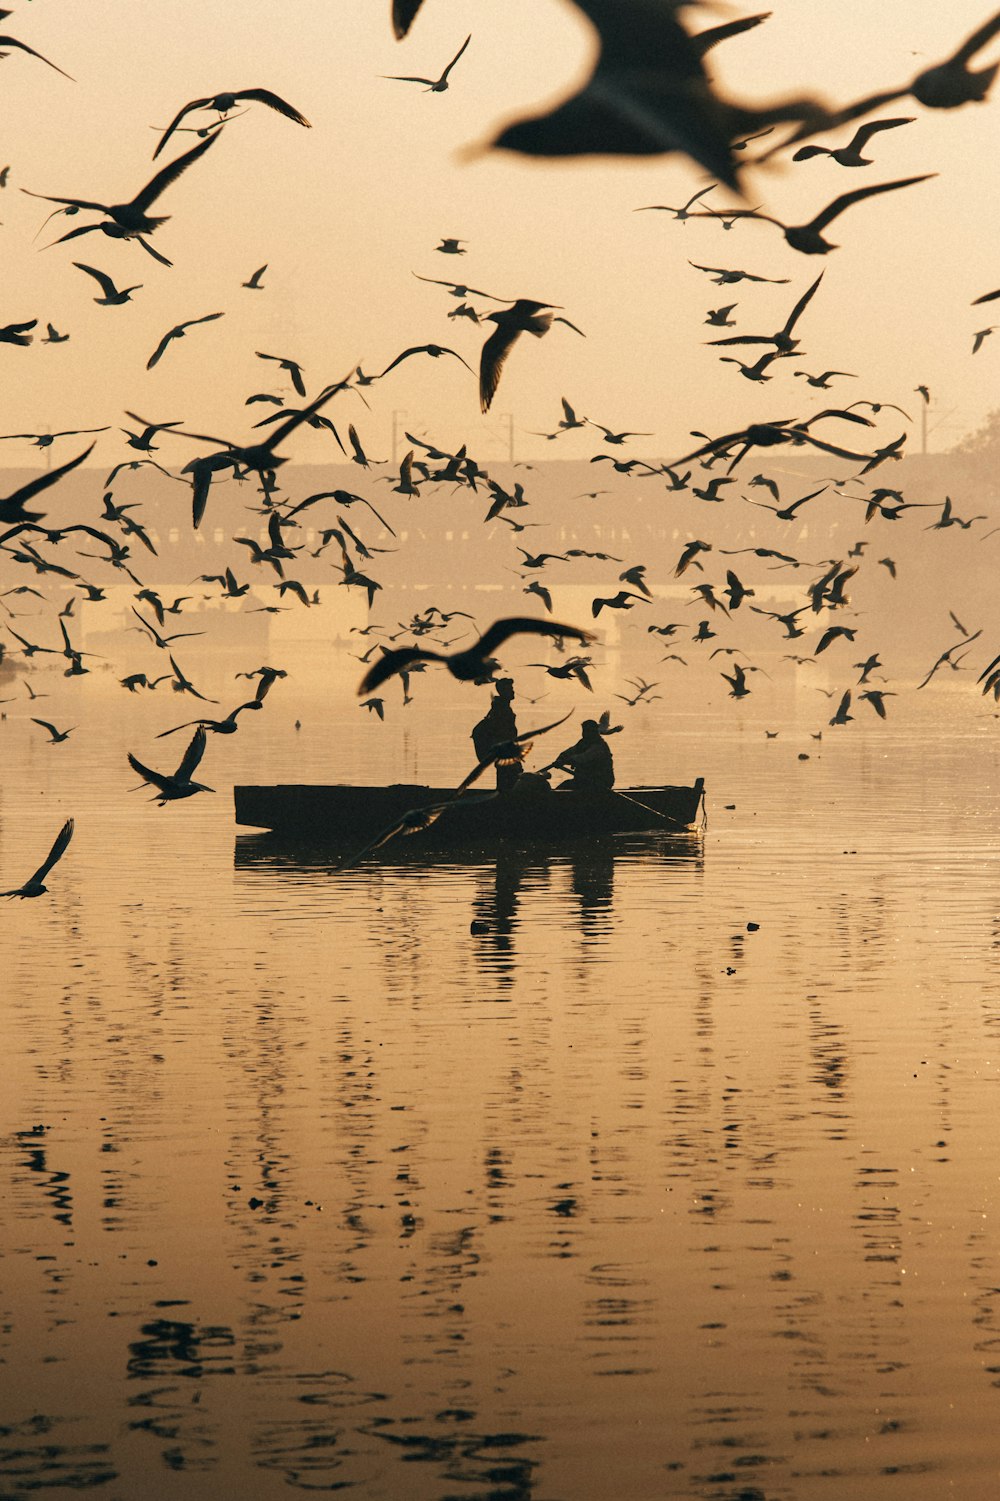 a man in a boat surrounded by birds